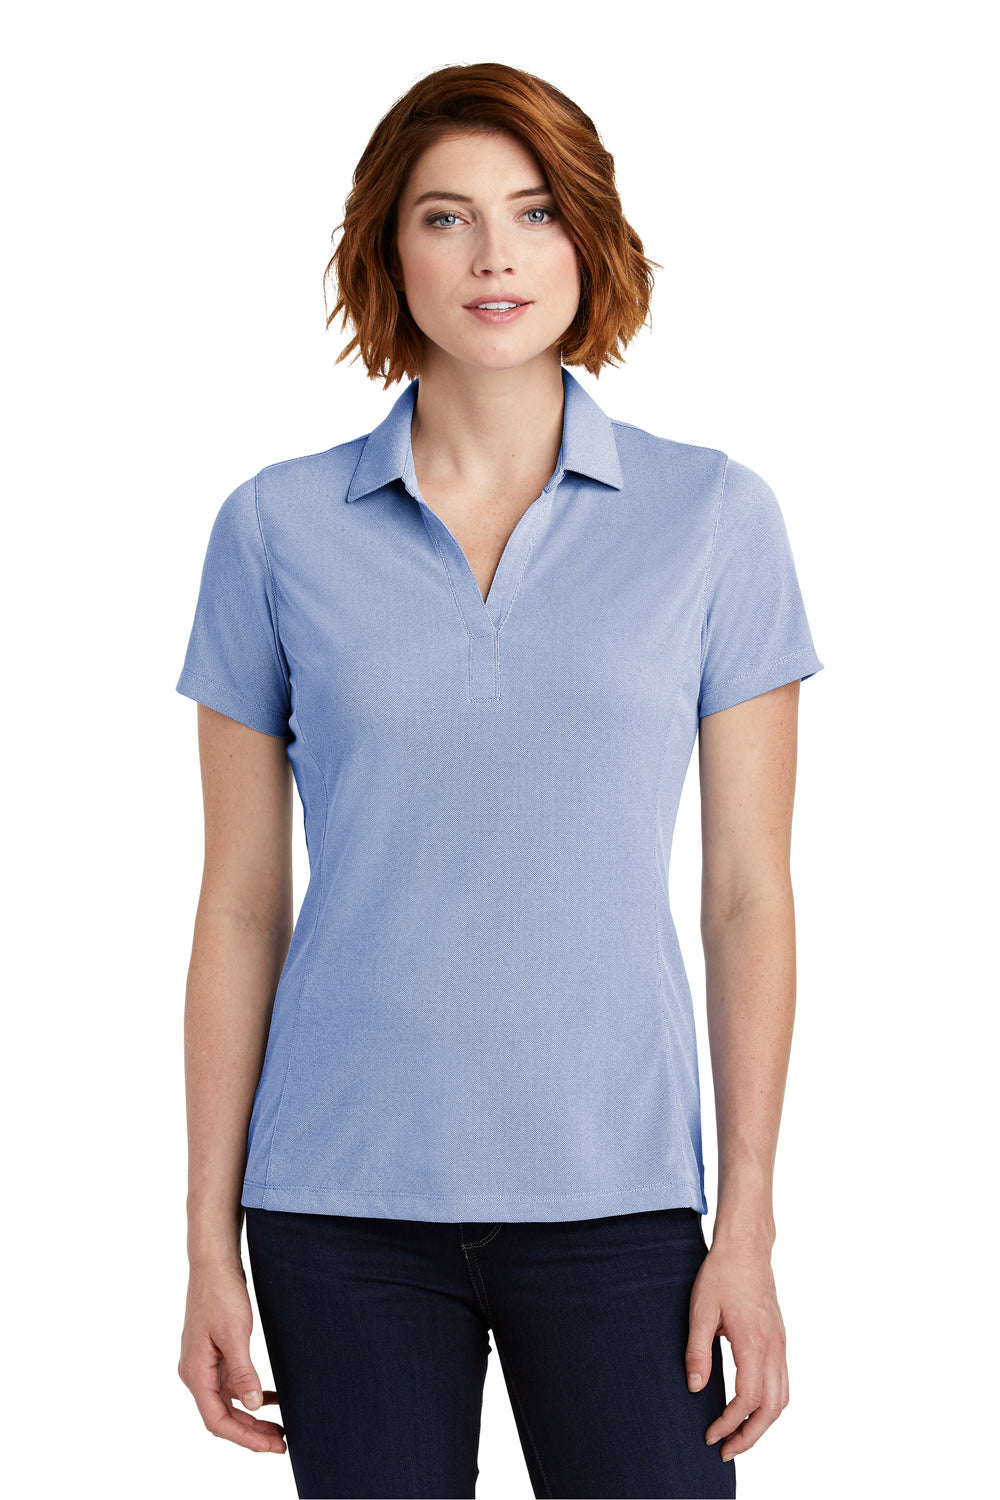 Port Authority LK582 Womens Oxford Moisture Wicking Short Sleeve Polo Shirt Royal Blue Front